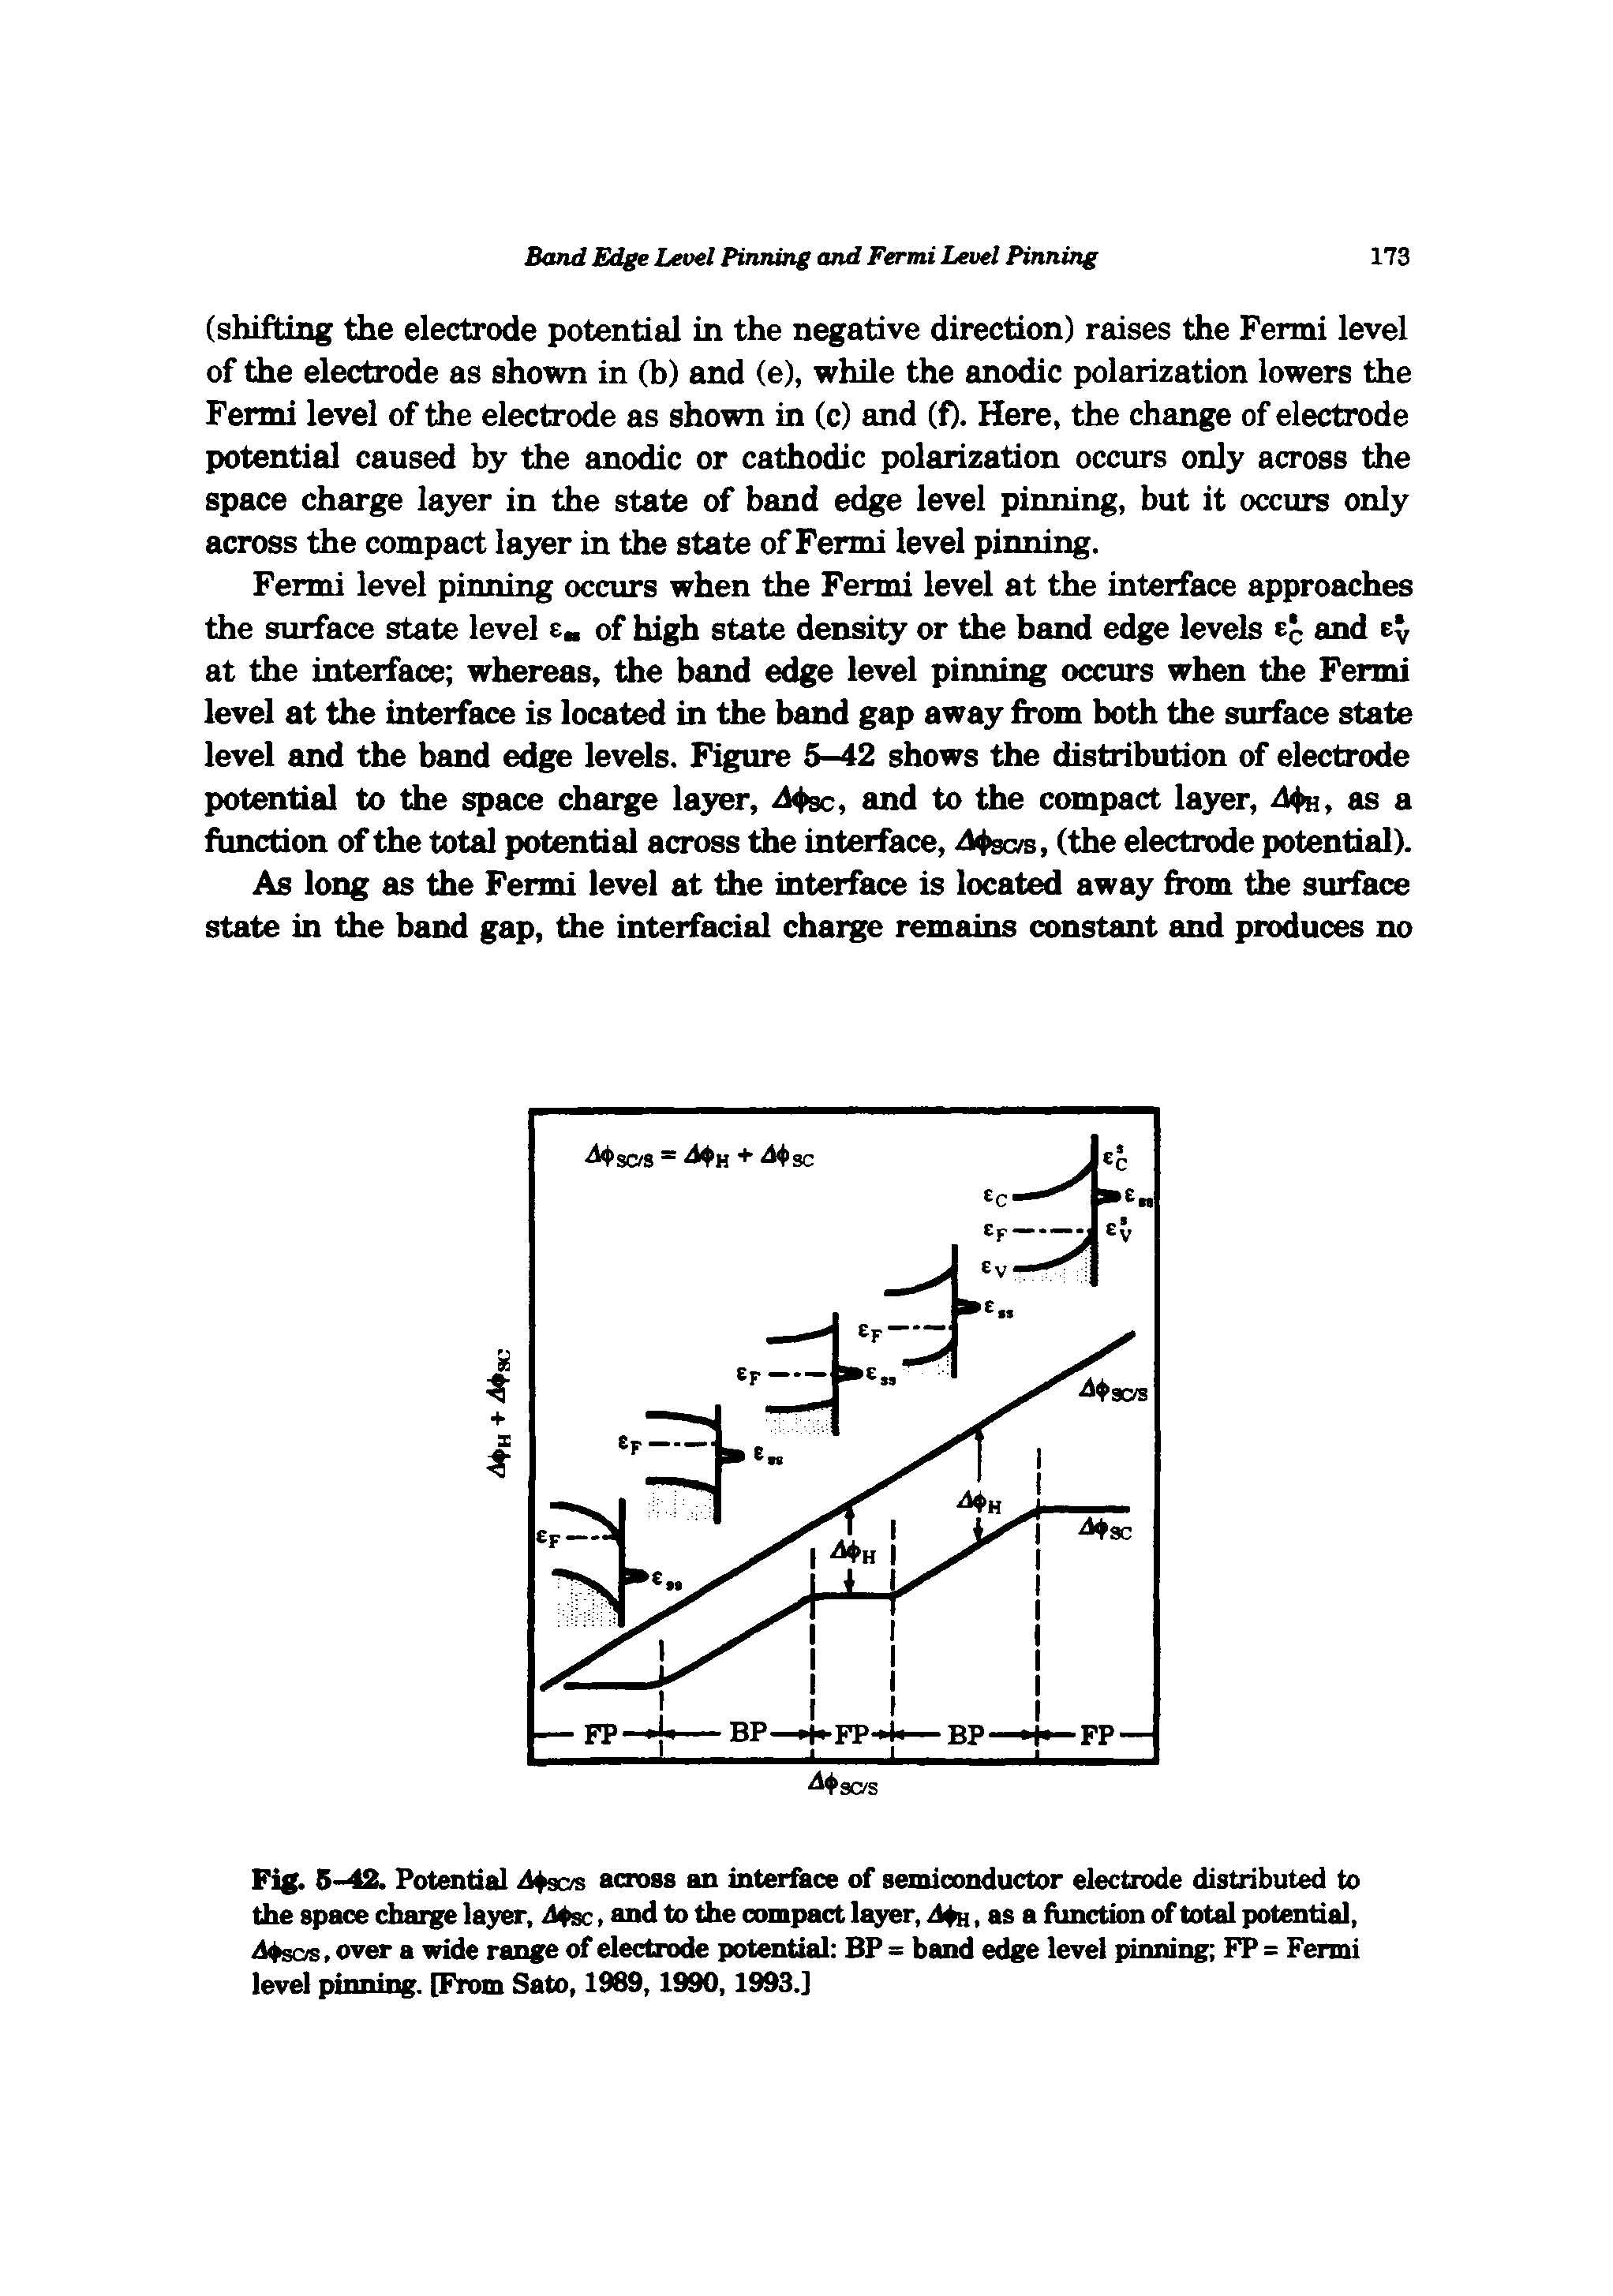 Fig. 5-42. Potential across an interlace of semiconductor electrode distributed to the space charge layer, At>sc, and to the compact layer,. as a function of total potential,...